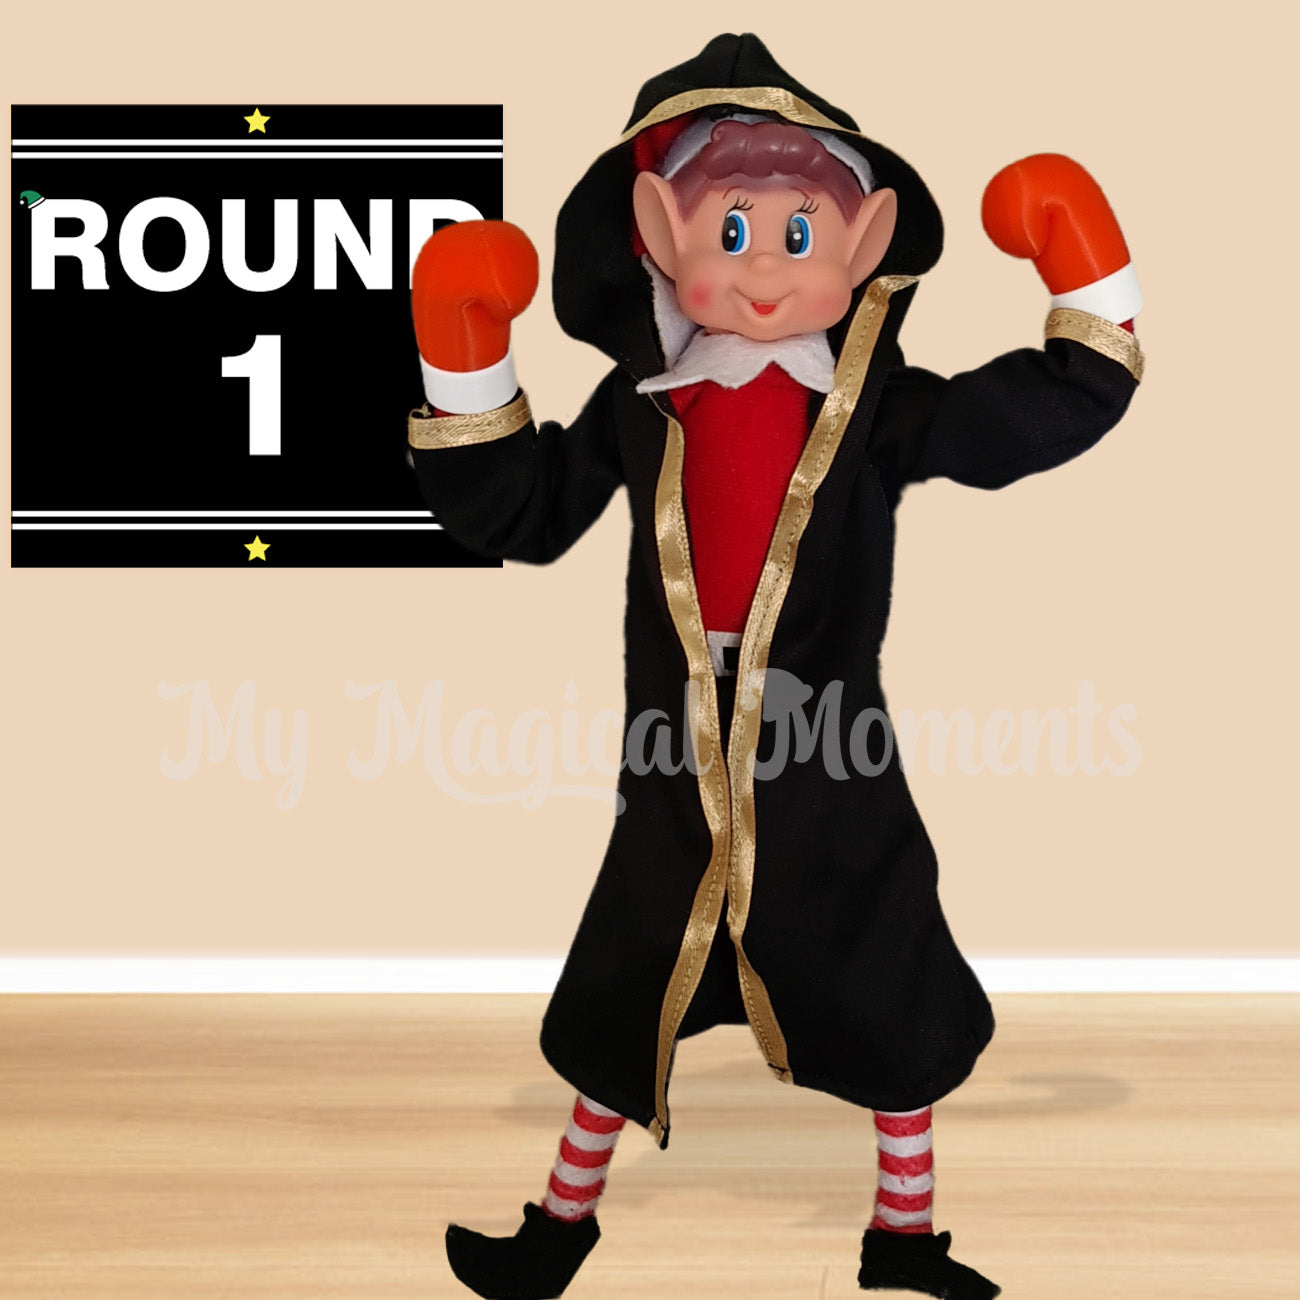 Elves behavin badly wearing a boxing outfit with boxing gloves